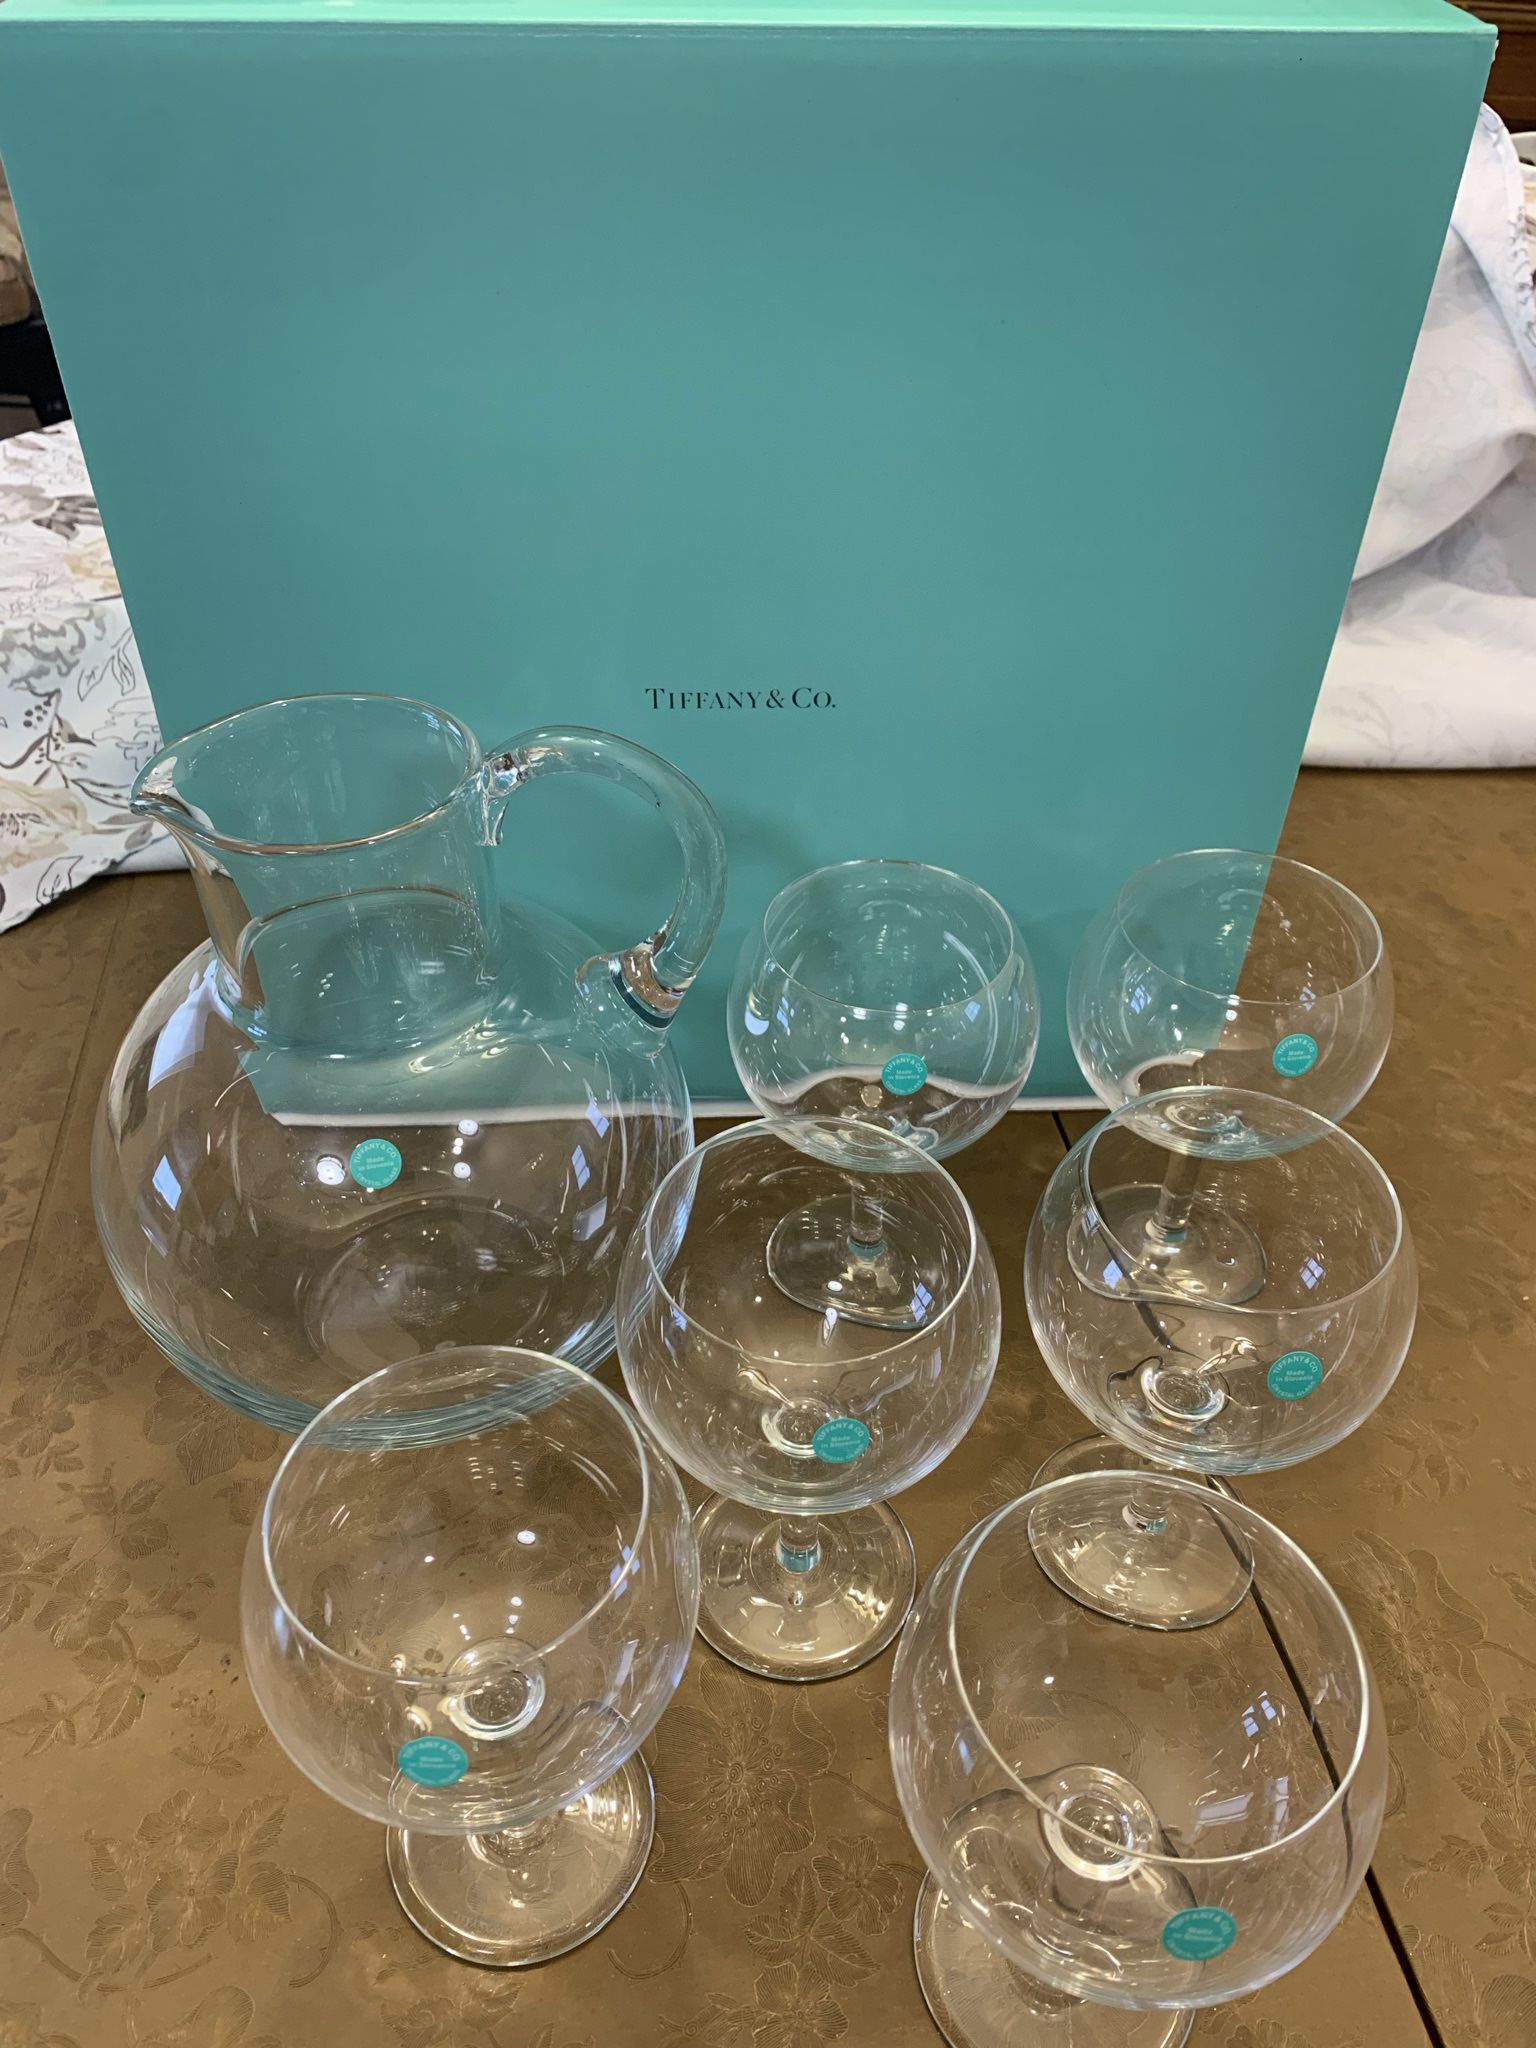 Tiffany & Co Set . Brand NEW- Tiffany and co Refresher Pitcher Glass Set